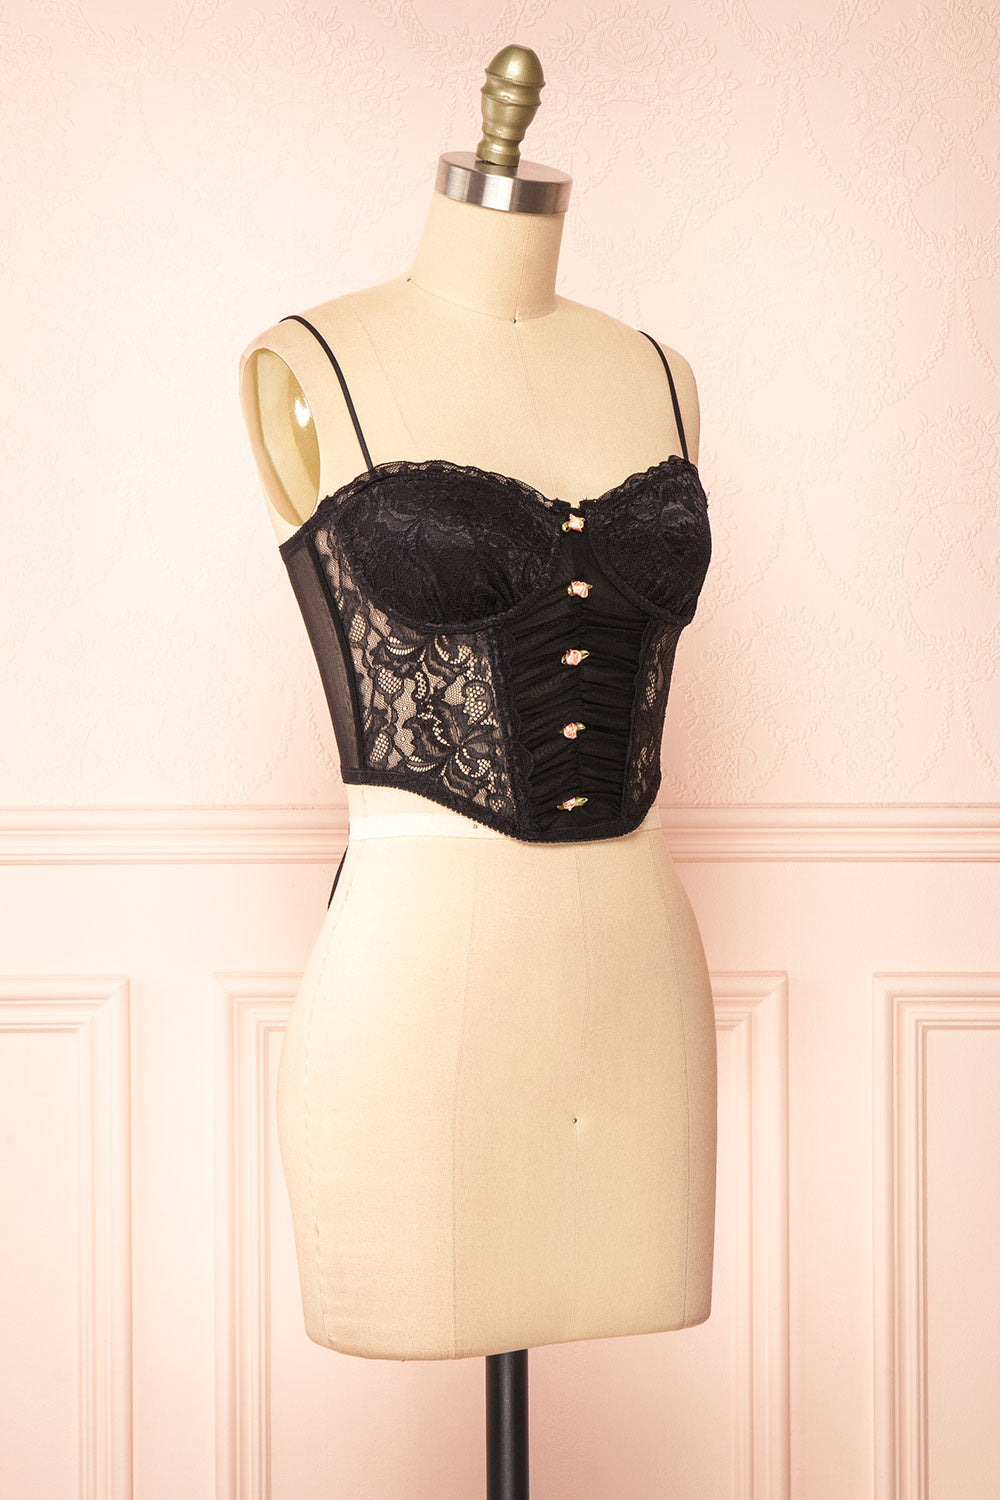 Lucie Cropped Black Lace Corset w/ Roses | Boutique 1861 side view